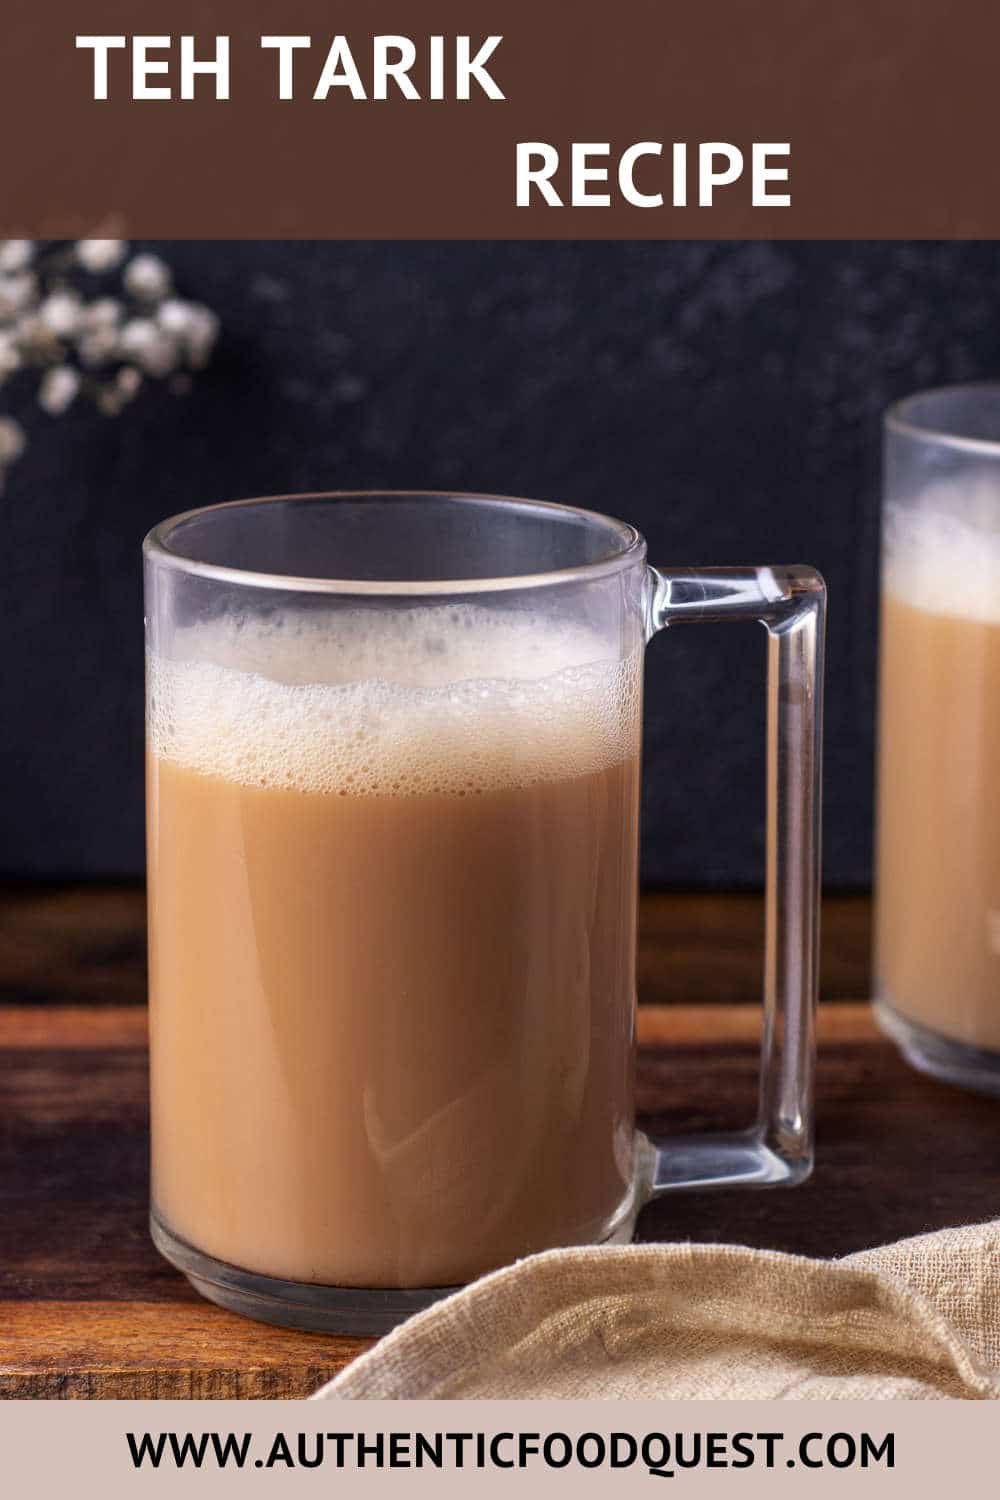 Teh Tarik Recipe: How To Make A Delicious Frothy Malaysian Pulled Tea